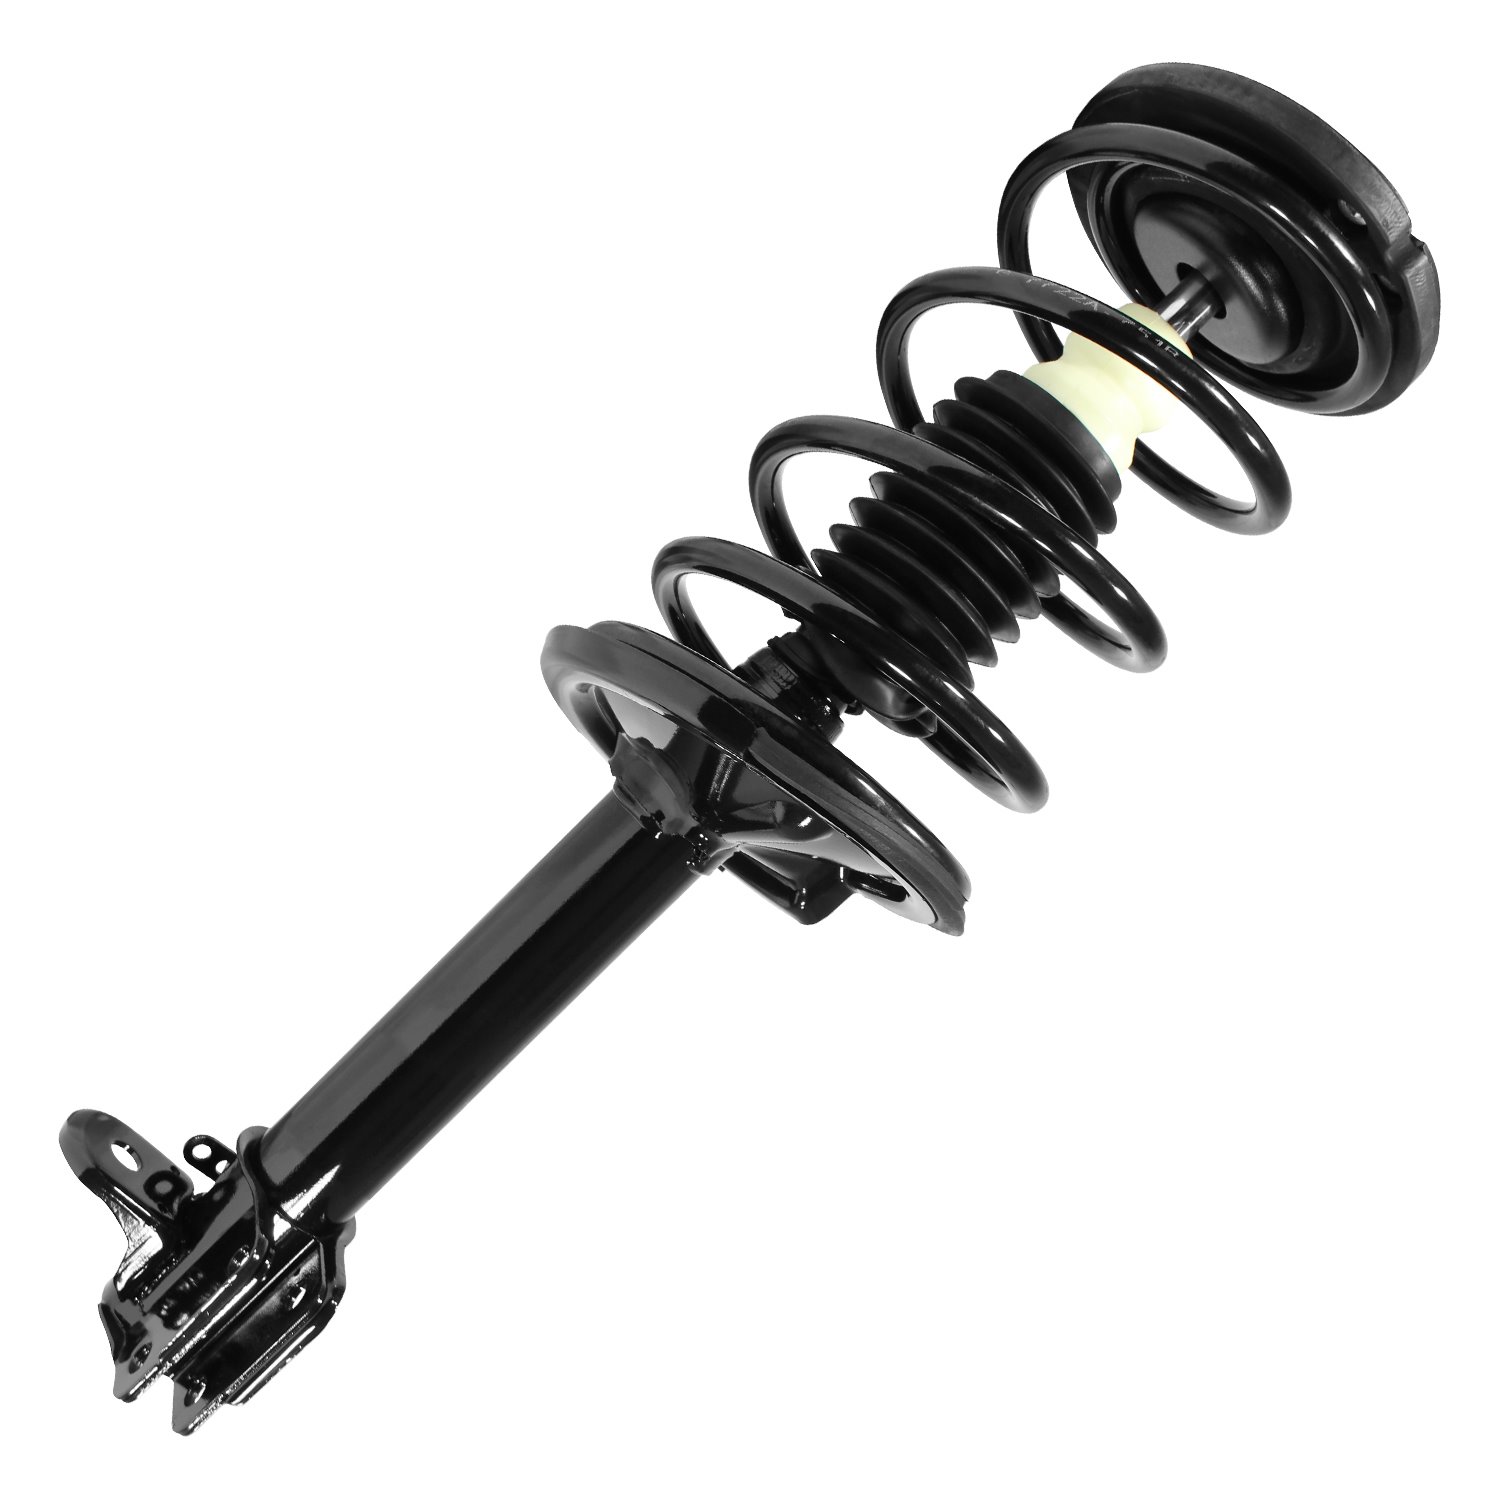 15212 Suspension Strut & Coil Spring Assembly Fits Select Chrysler Neon, Dodge Neon, Dodge SX 2.0, Plymouth Neon